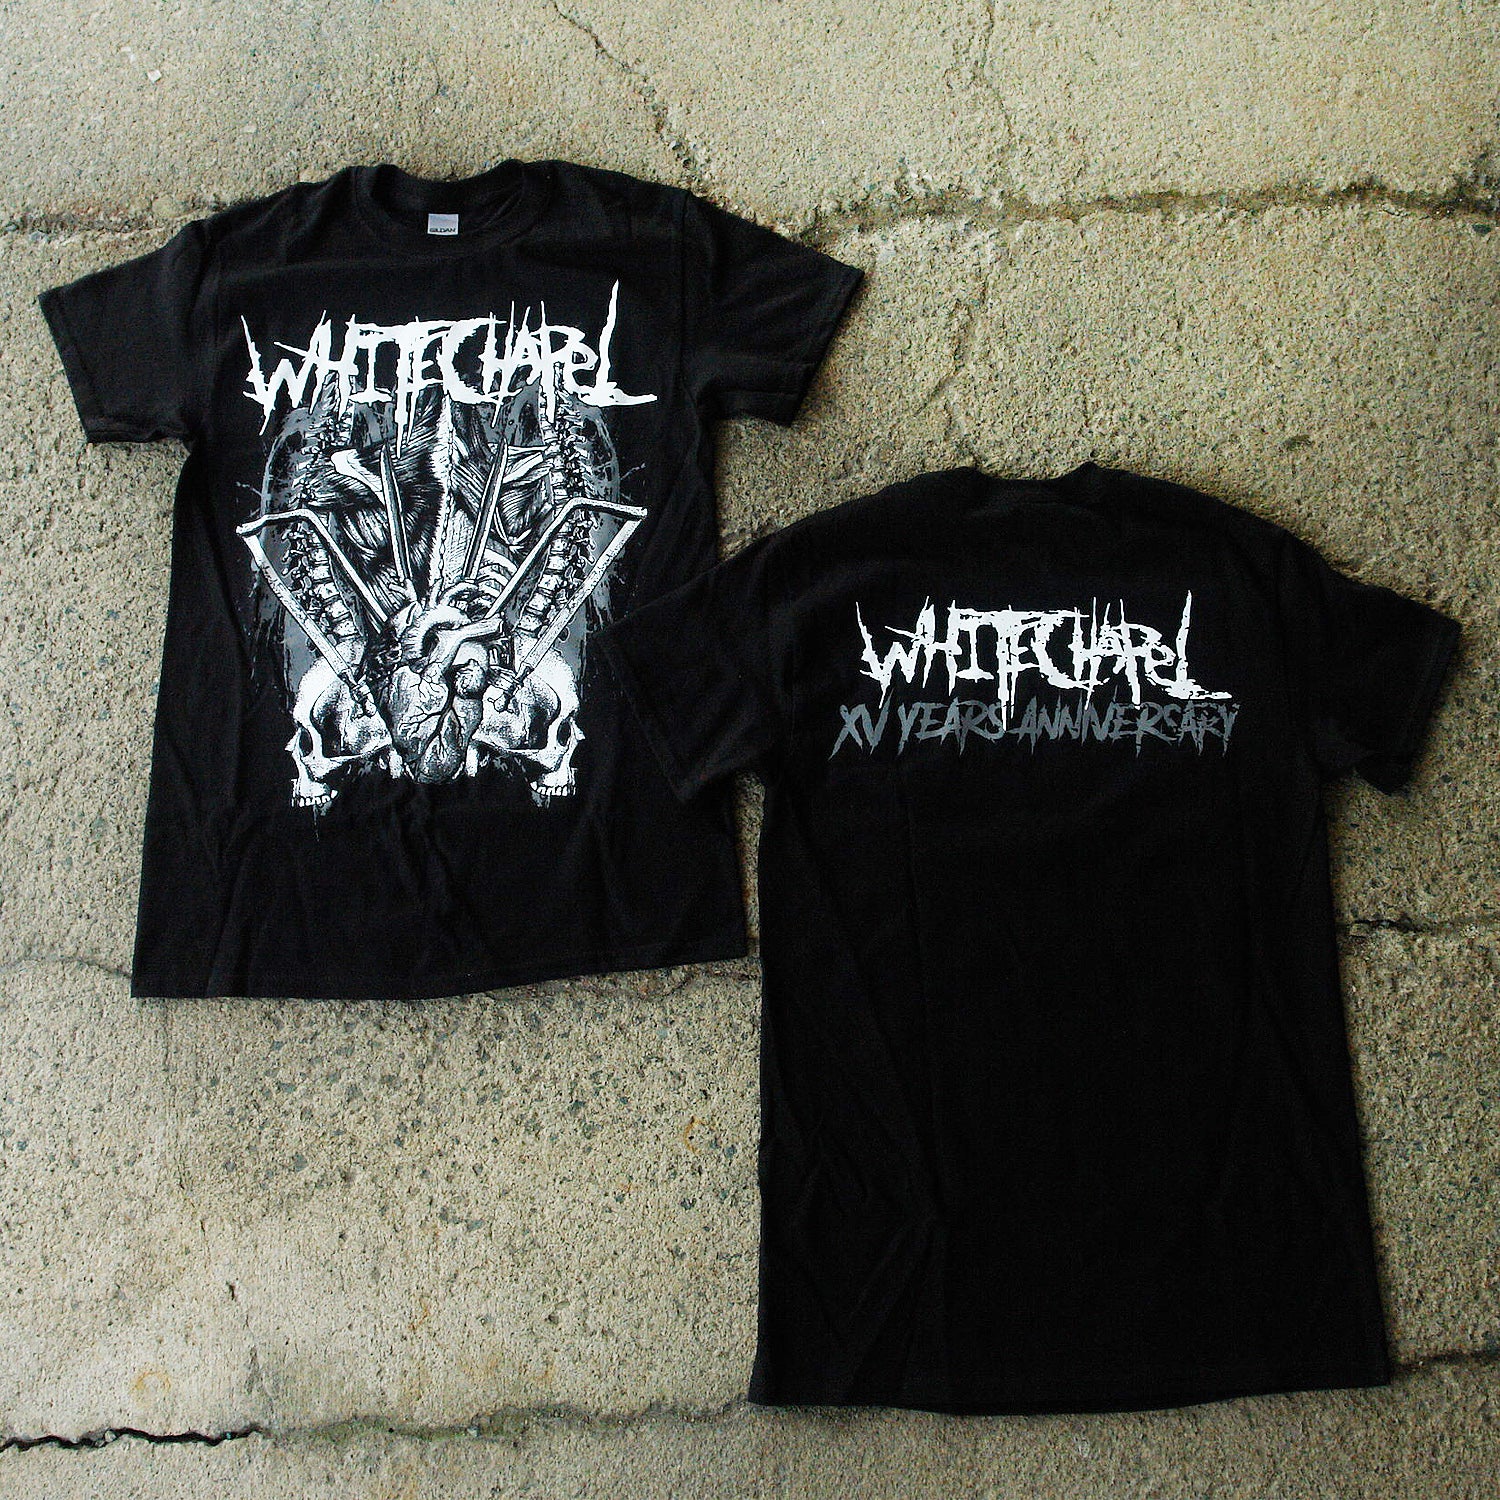 Image of the front and back of a black tshirt against a grey concrete background. The front of the shirt says 